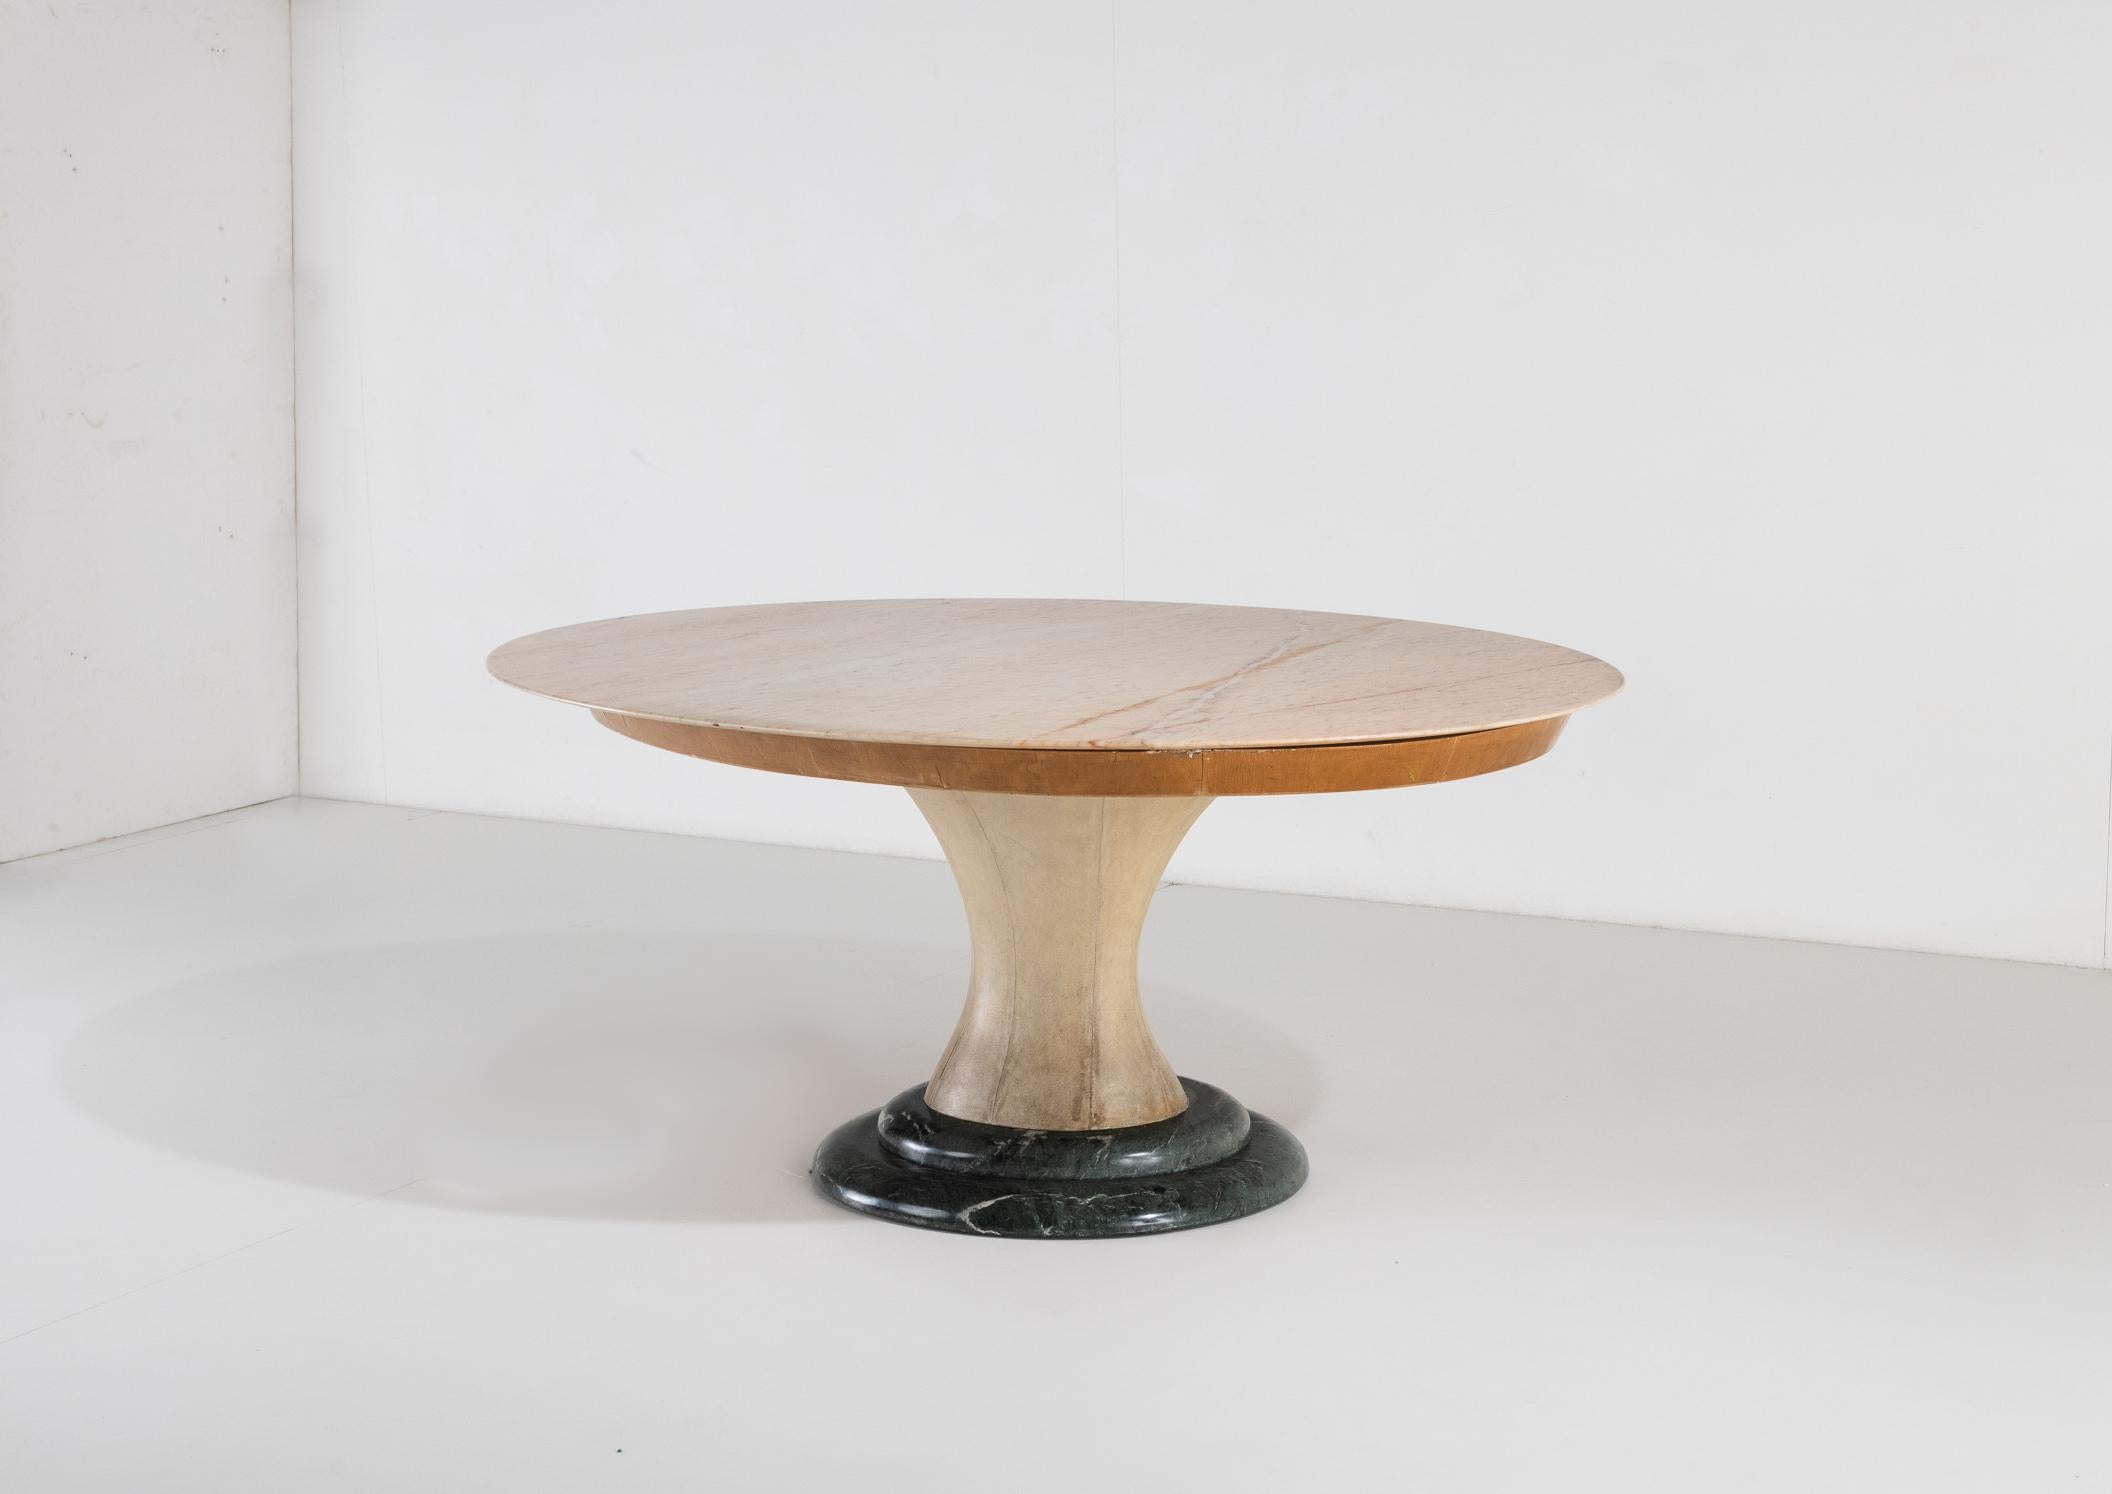 A table with soft and elegant lines, it features a solid base anchored with green marble and an hourglass-shaped wood main body with original parchment covers. The support holds a thick-edged wood top that, for its part, holds a splendid pink oval